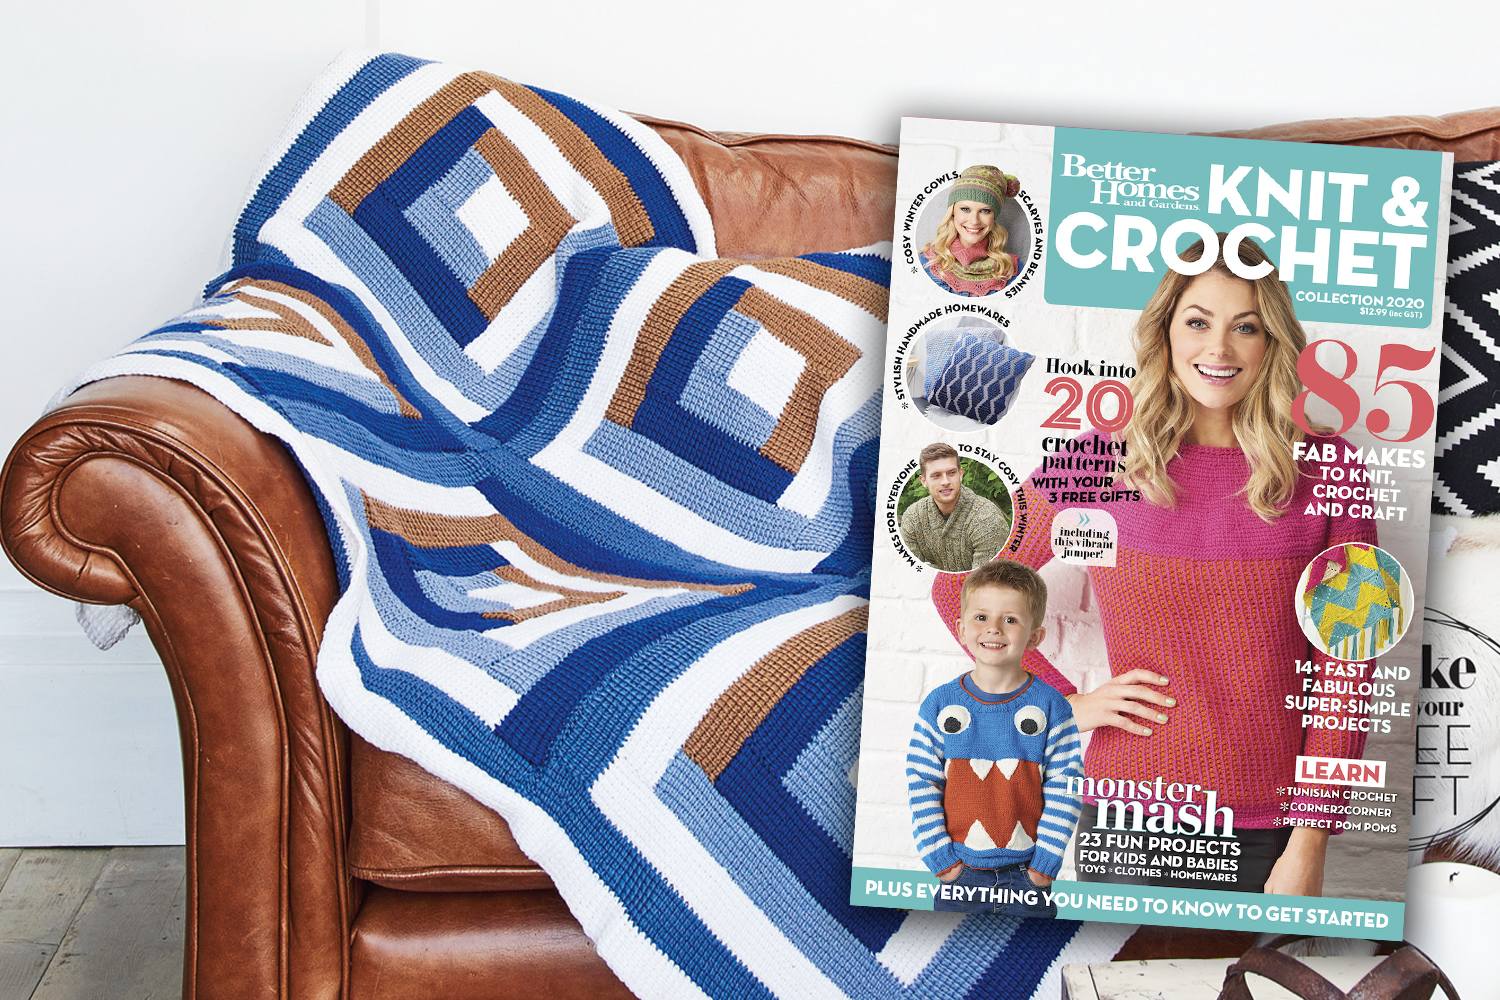 What's Inside Knit & Crochet Collection 2020 | Better Homes And Gardens